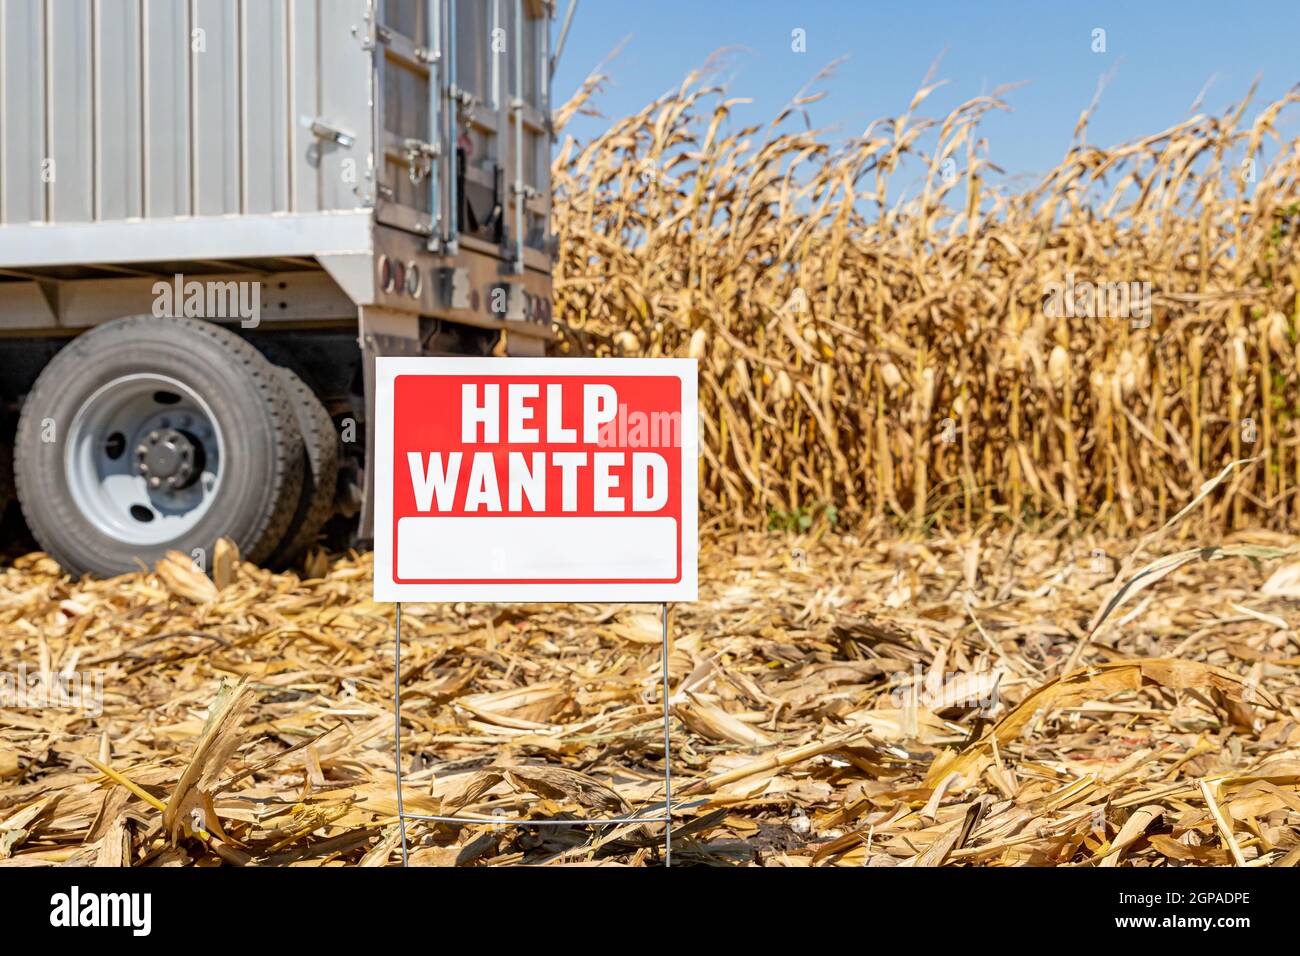 Help wanted sign in farm field. Farm labor shortage, agriculture job market and employment concept Stock Photo